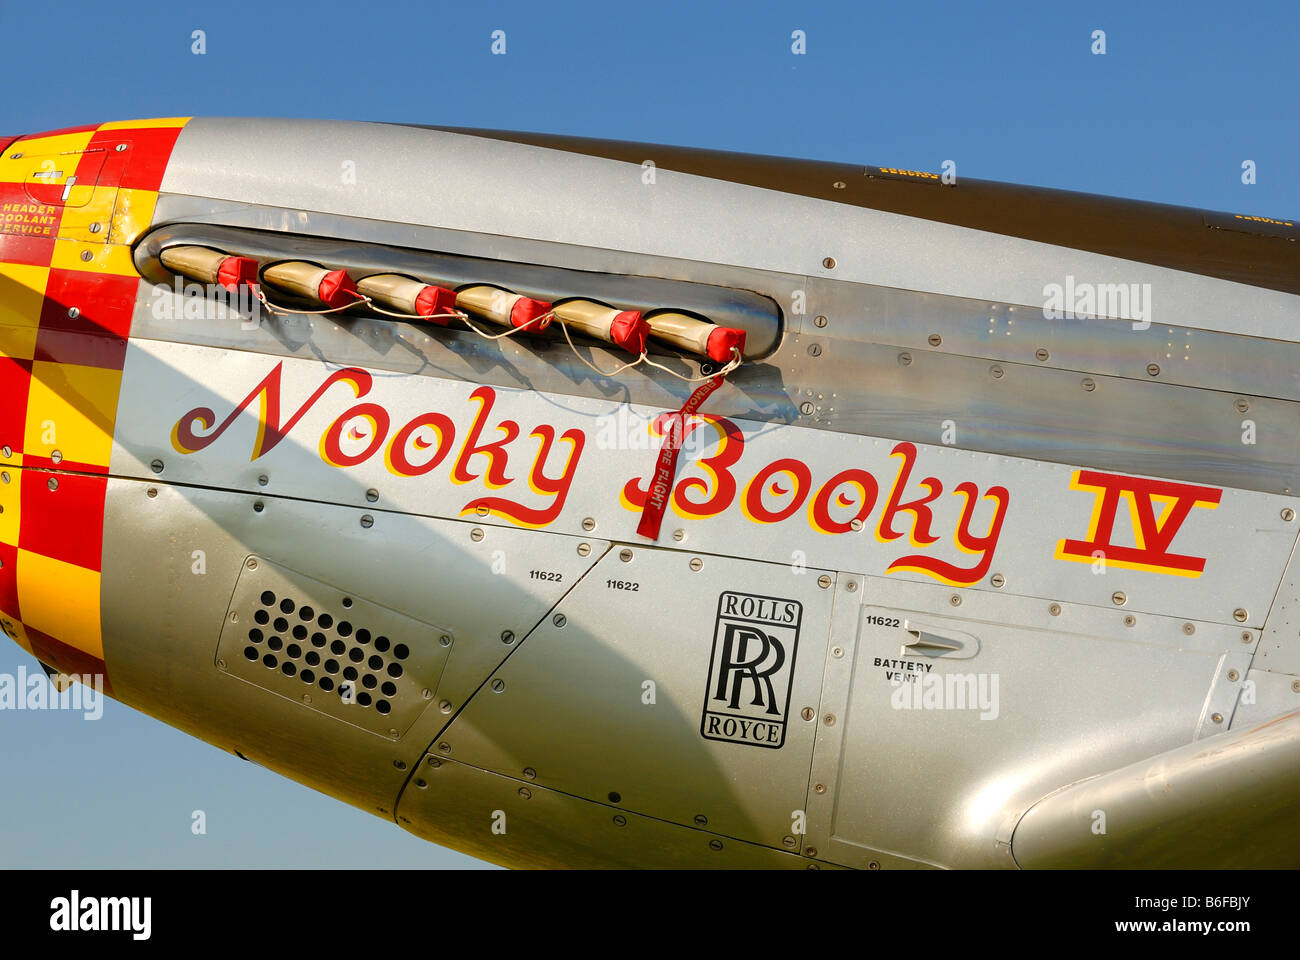 Wwii Bomber Nose Art Face